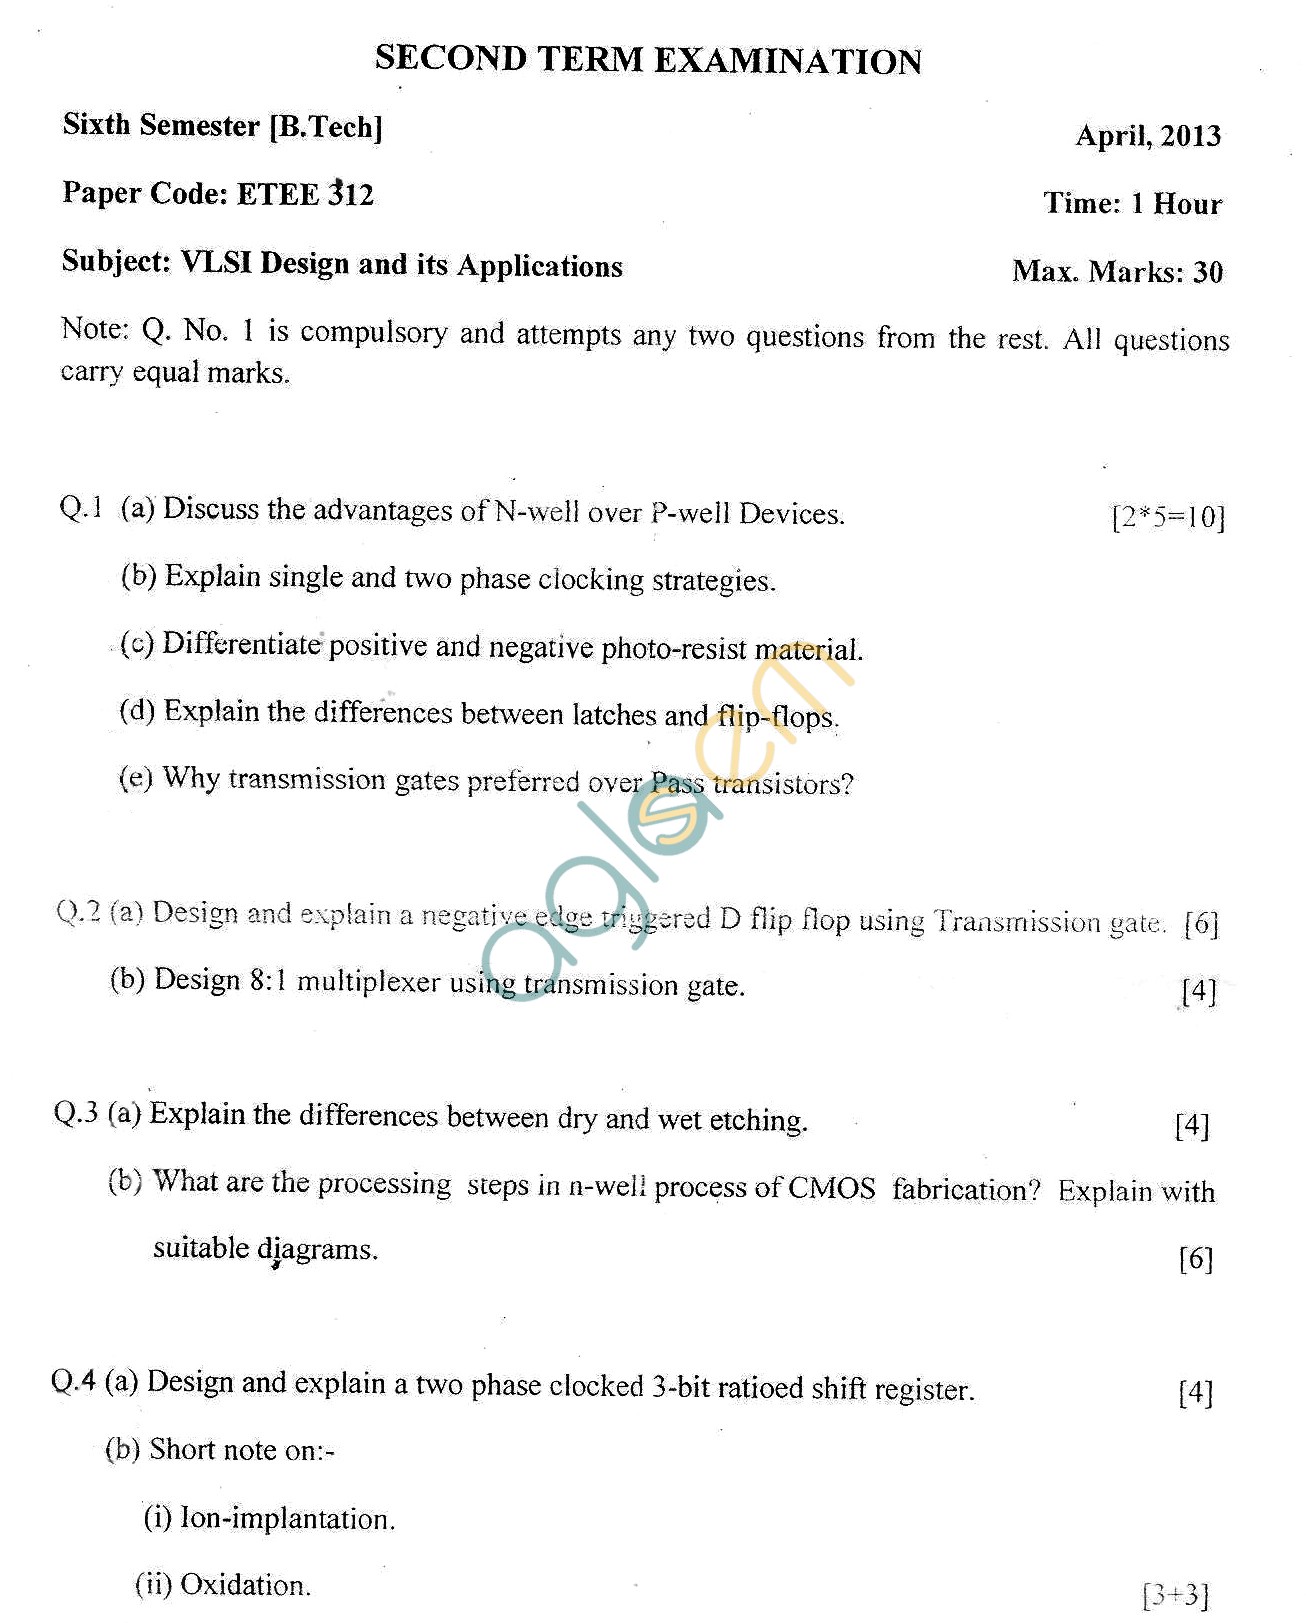 GGSIPU Question Papers Sixth Semester – Second Term 2013 – ETEE-312